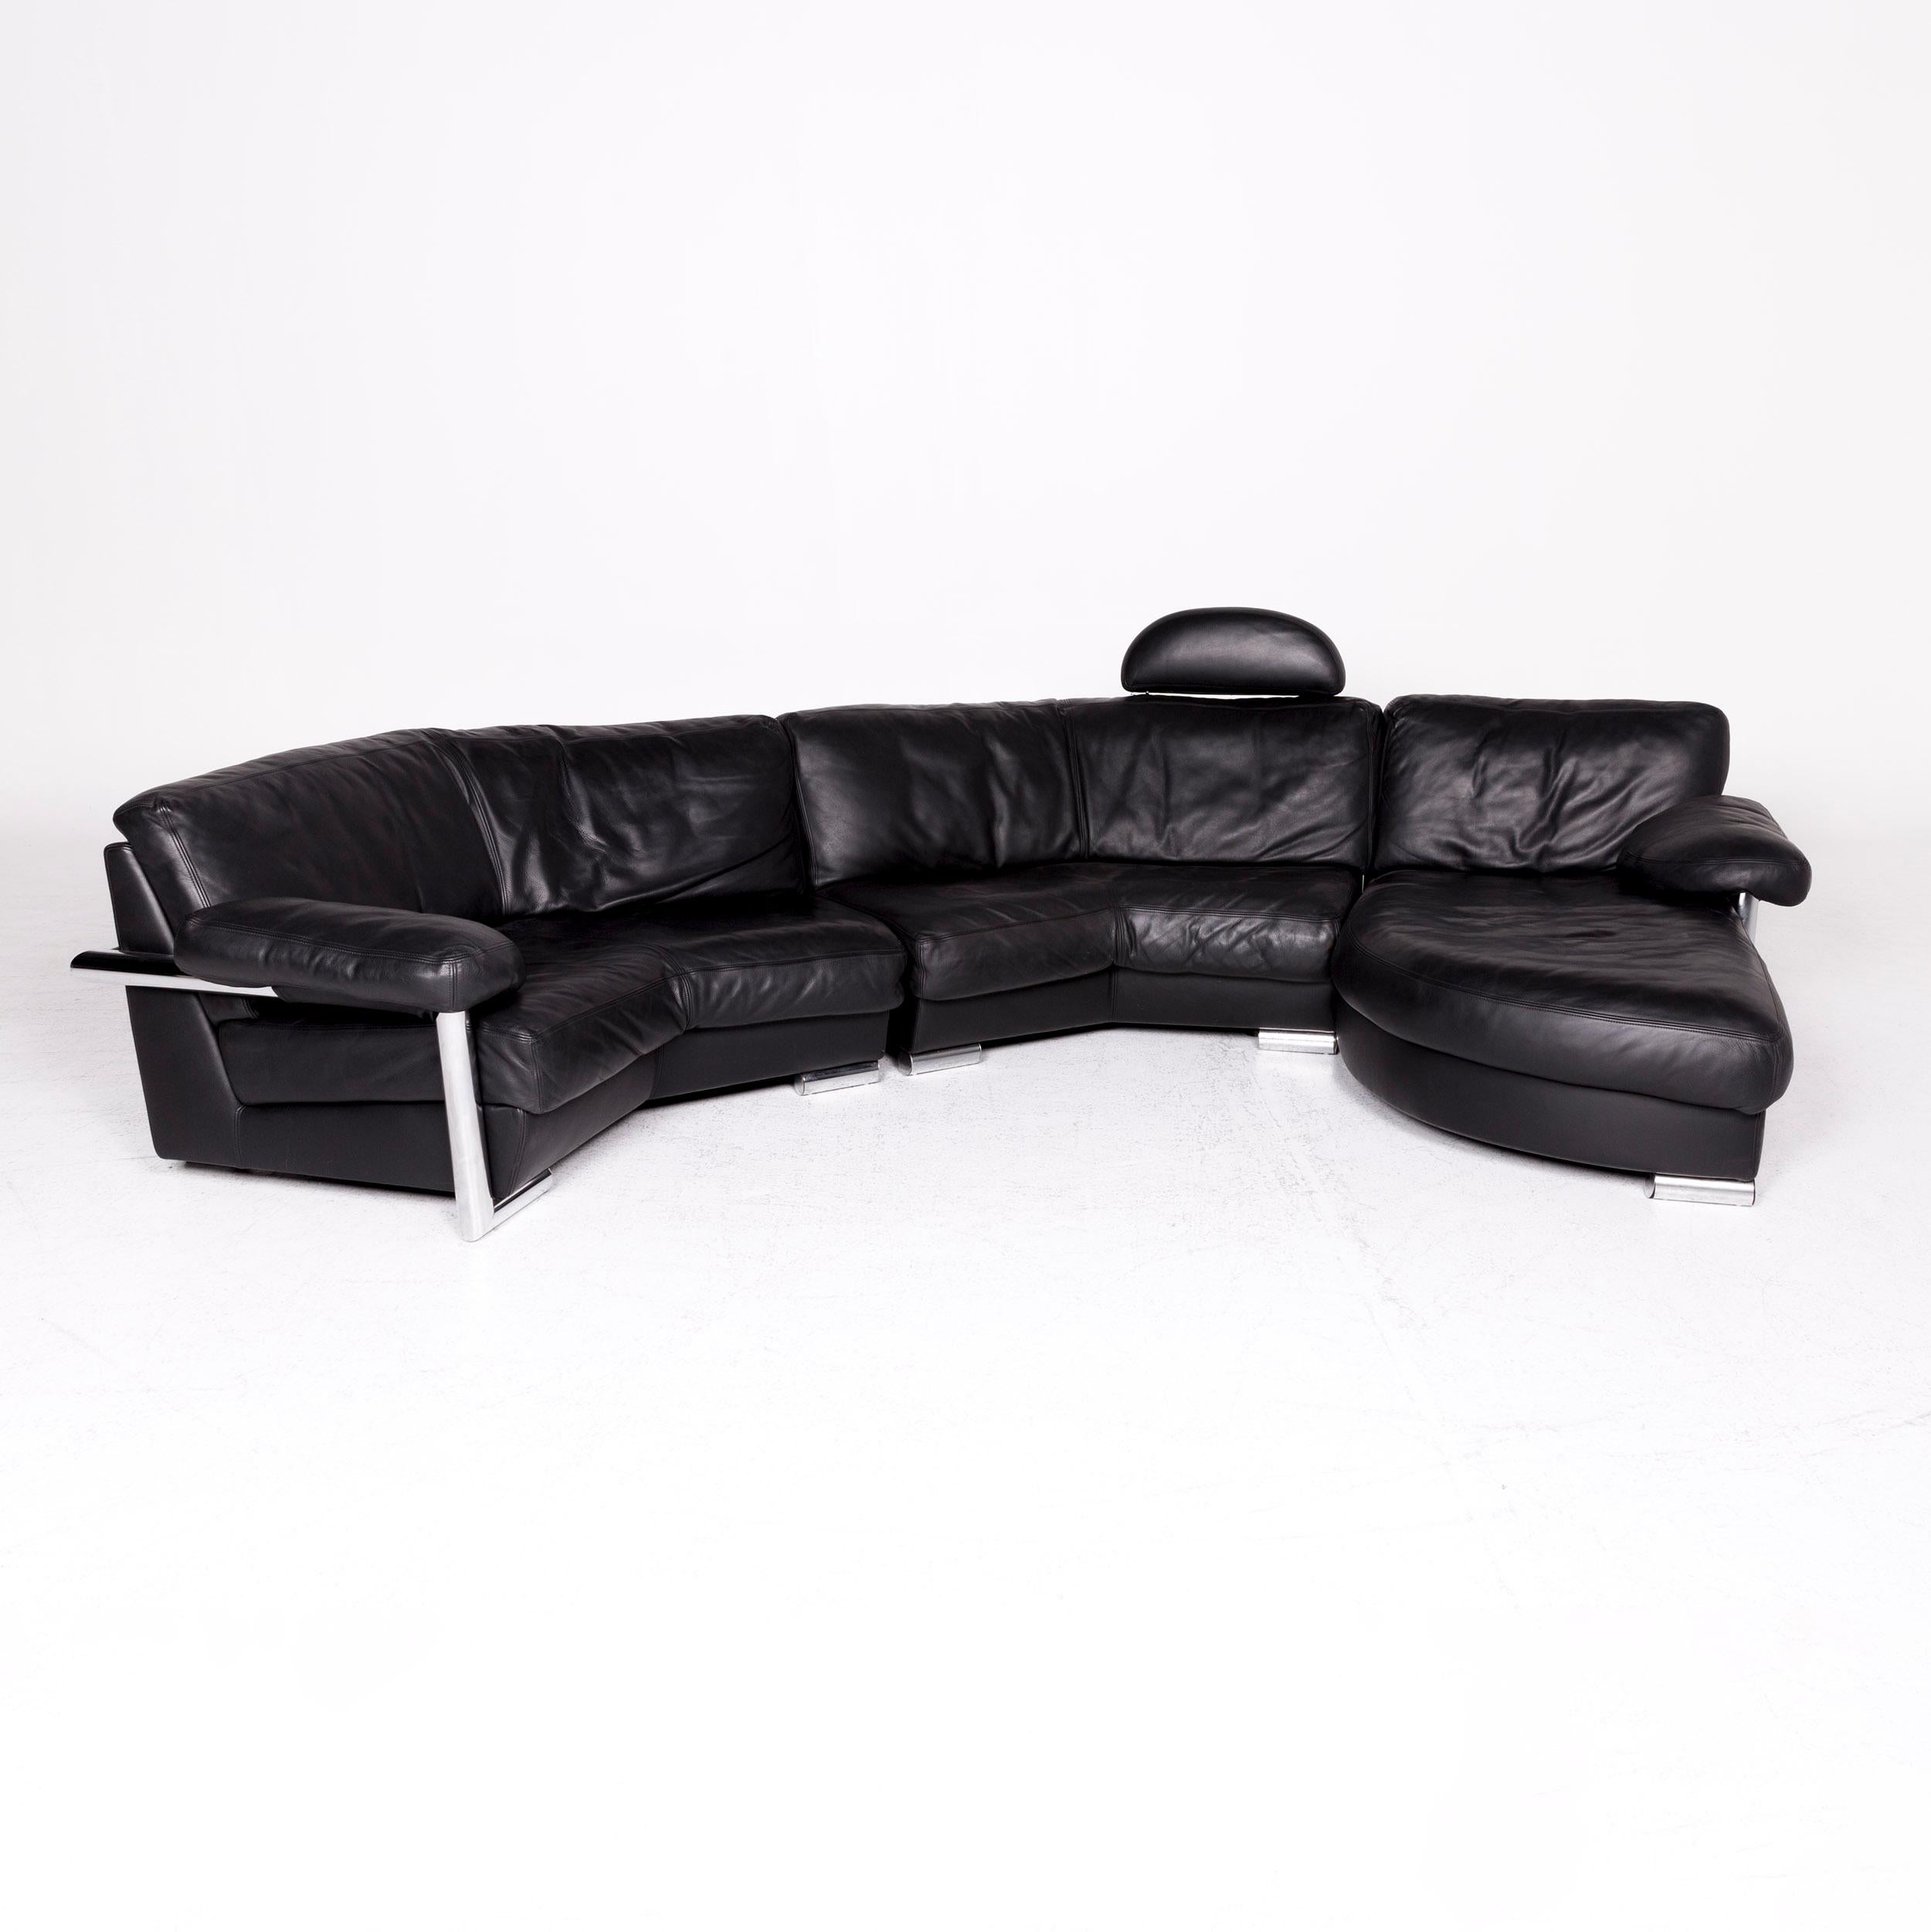 We bring to you an Artanova Medea designer leather corner sofa black genuine leather sofa couch.

Product measurements in centimeters:

Depth 90
Width 320
Height 74
Seat-height 47
Rest-height 58
Seat-depth 119
Seat-width 135
Back-height